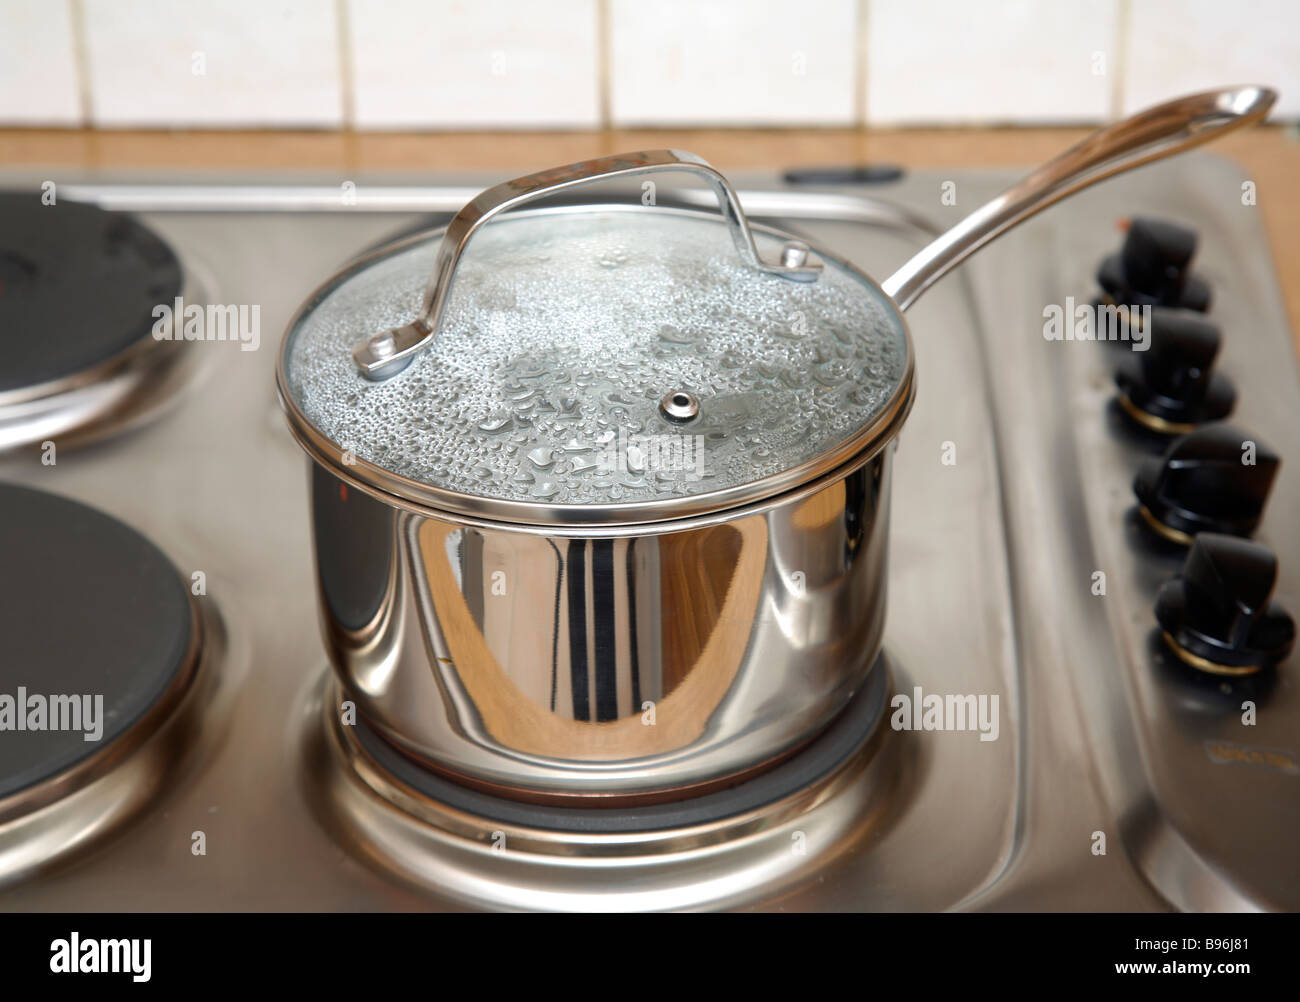 A stainless steel sausepan on a hob. Stock Photo